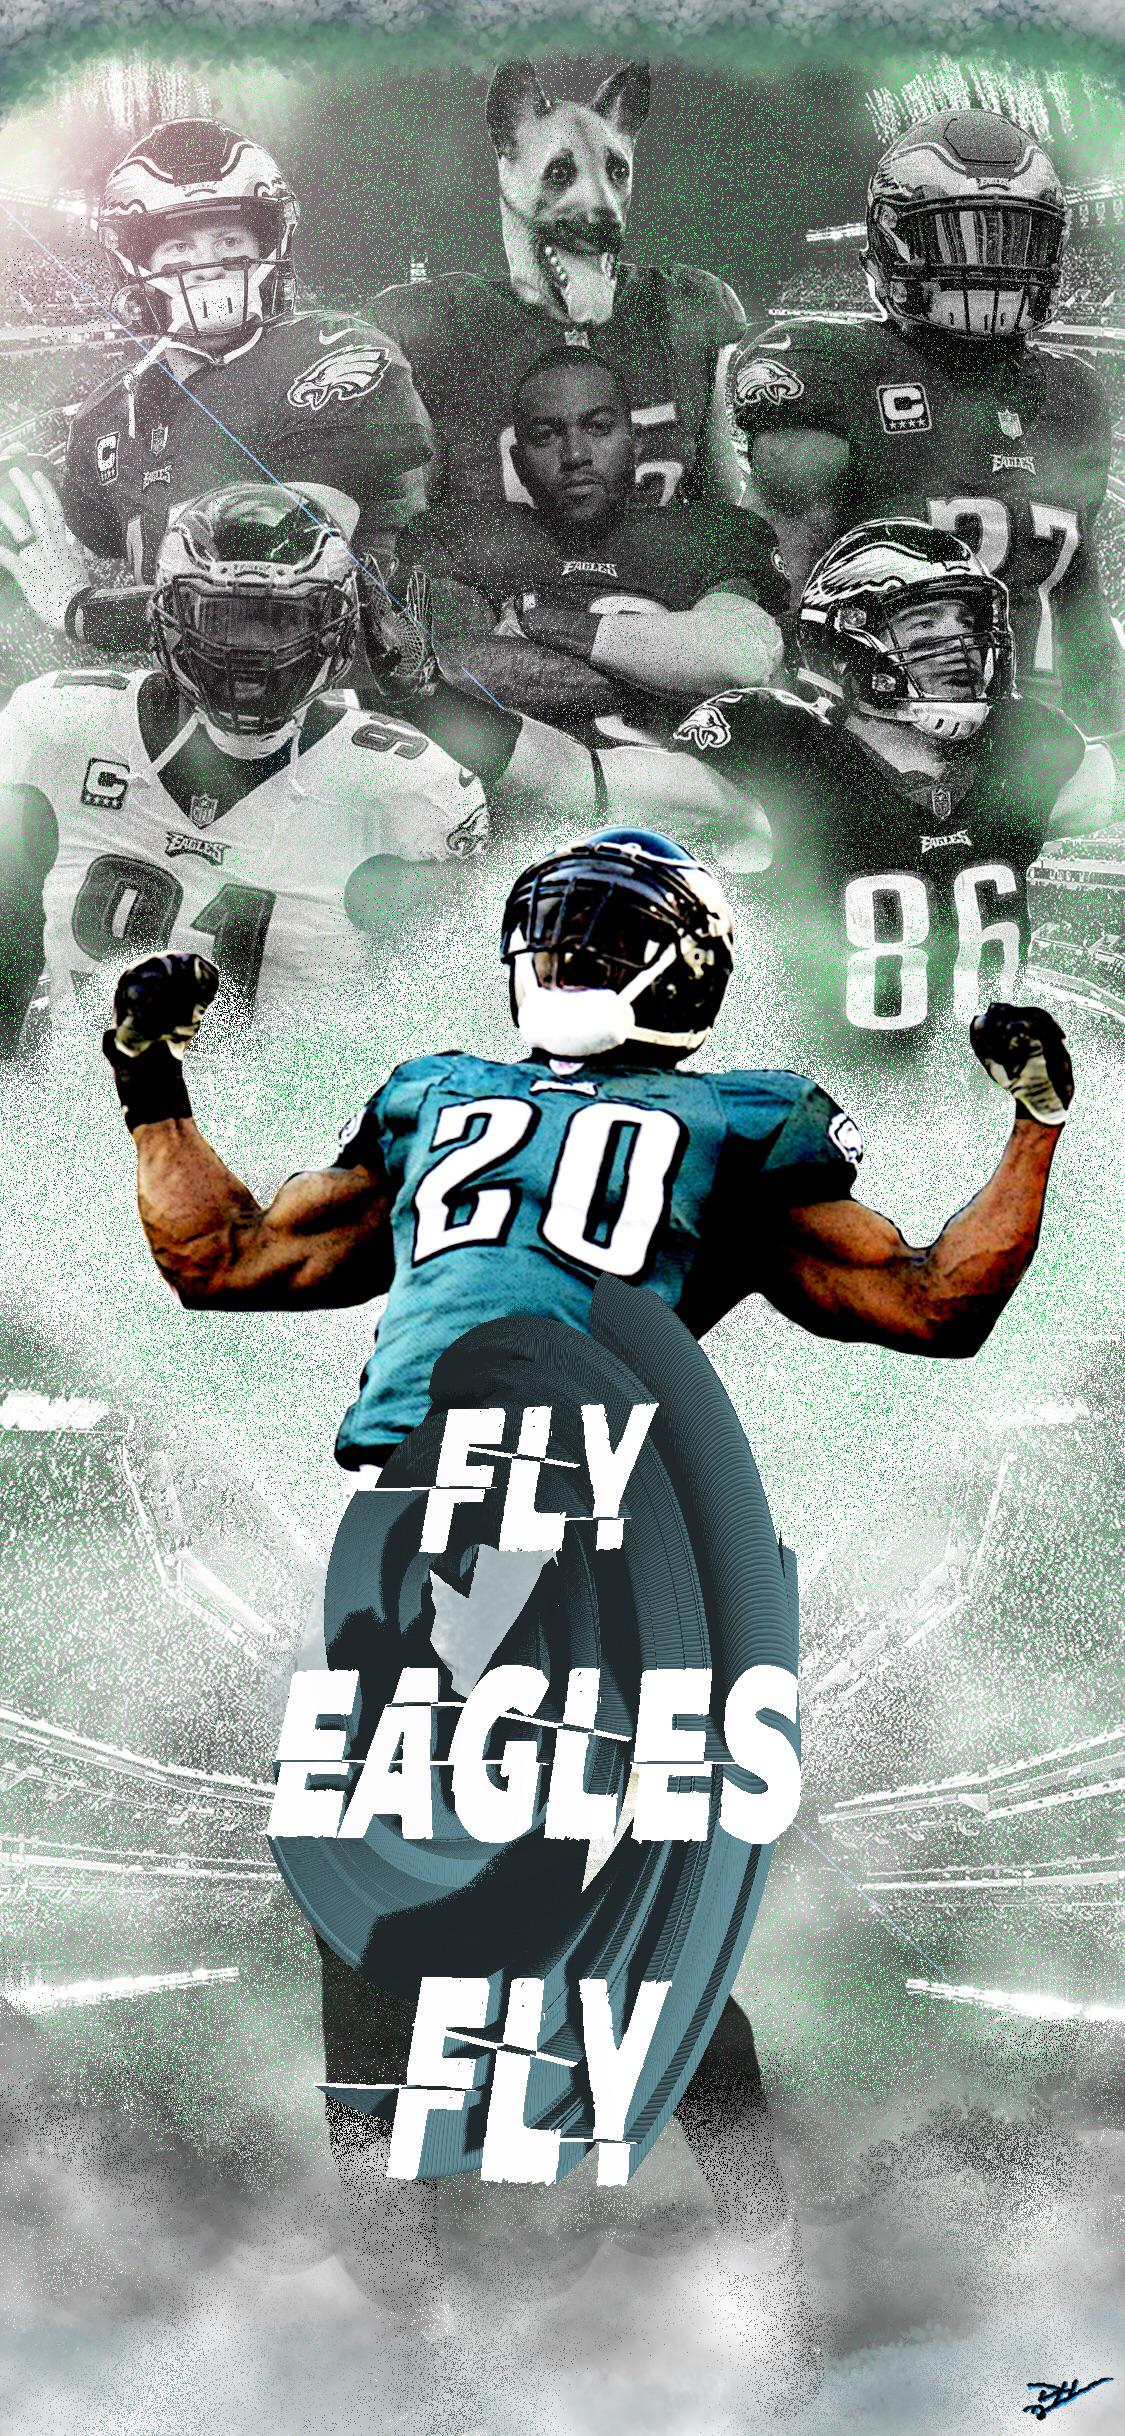 Spent some time today working on this wallpaper (iPhone X dimensions) since I'm too excited for tomorrow! Hope yall like it. GO BIRDS!!!: eagles